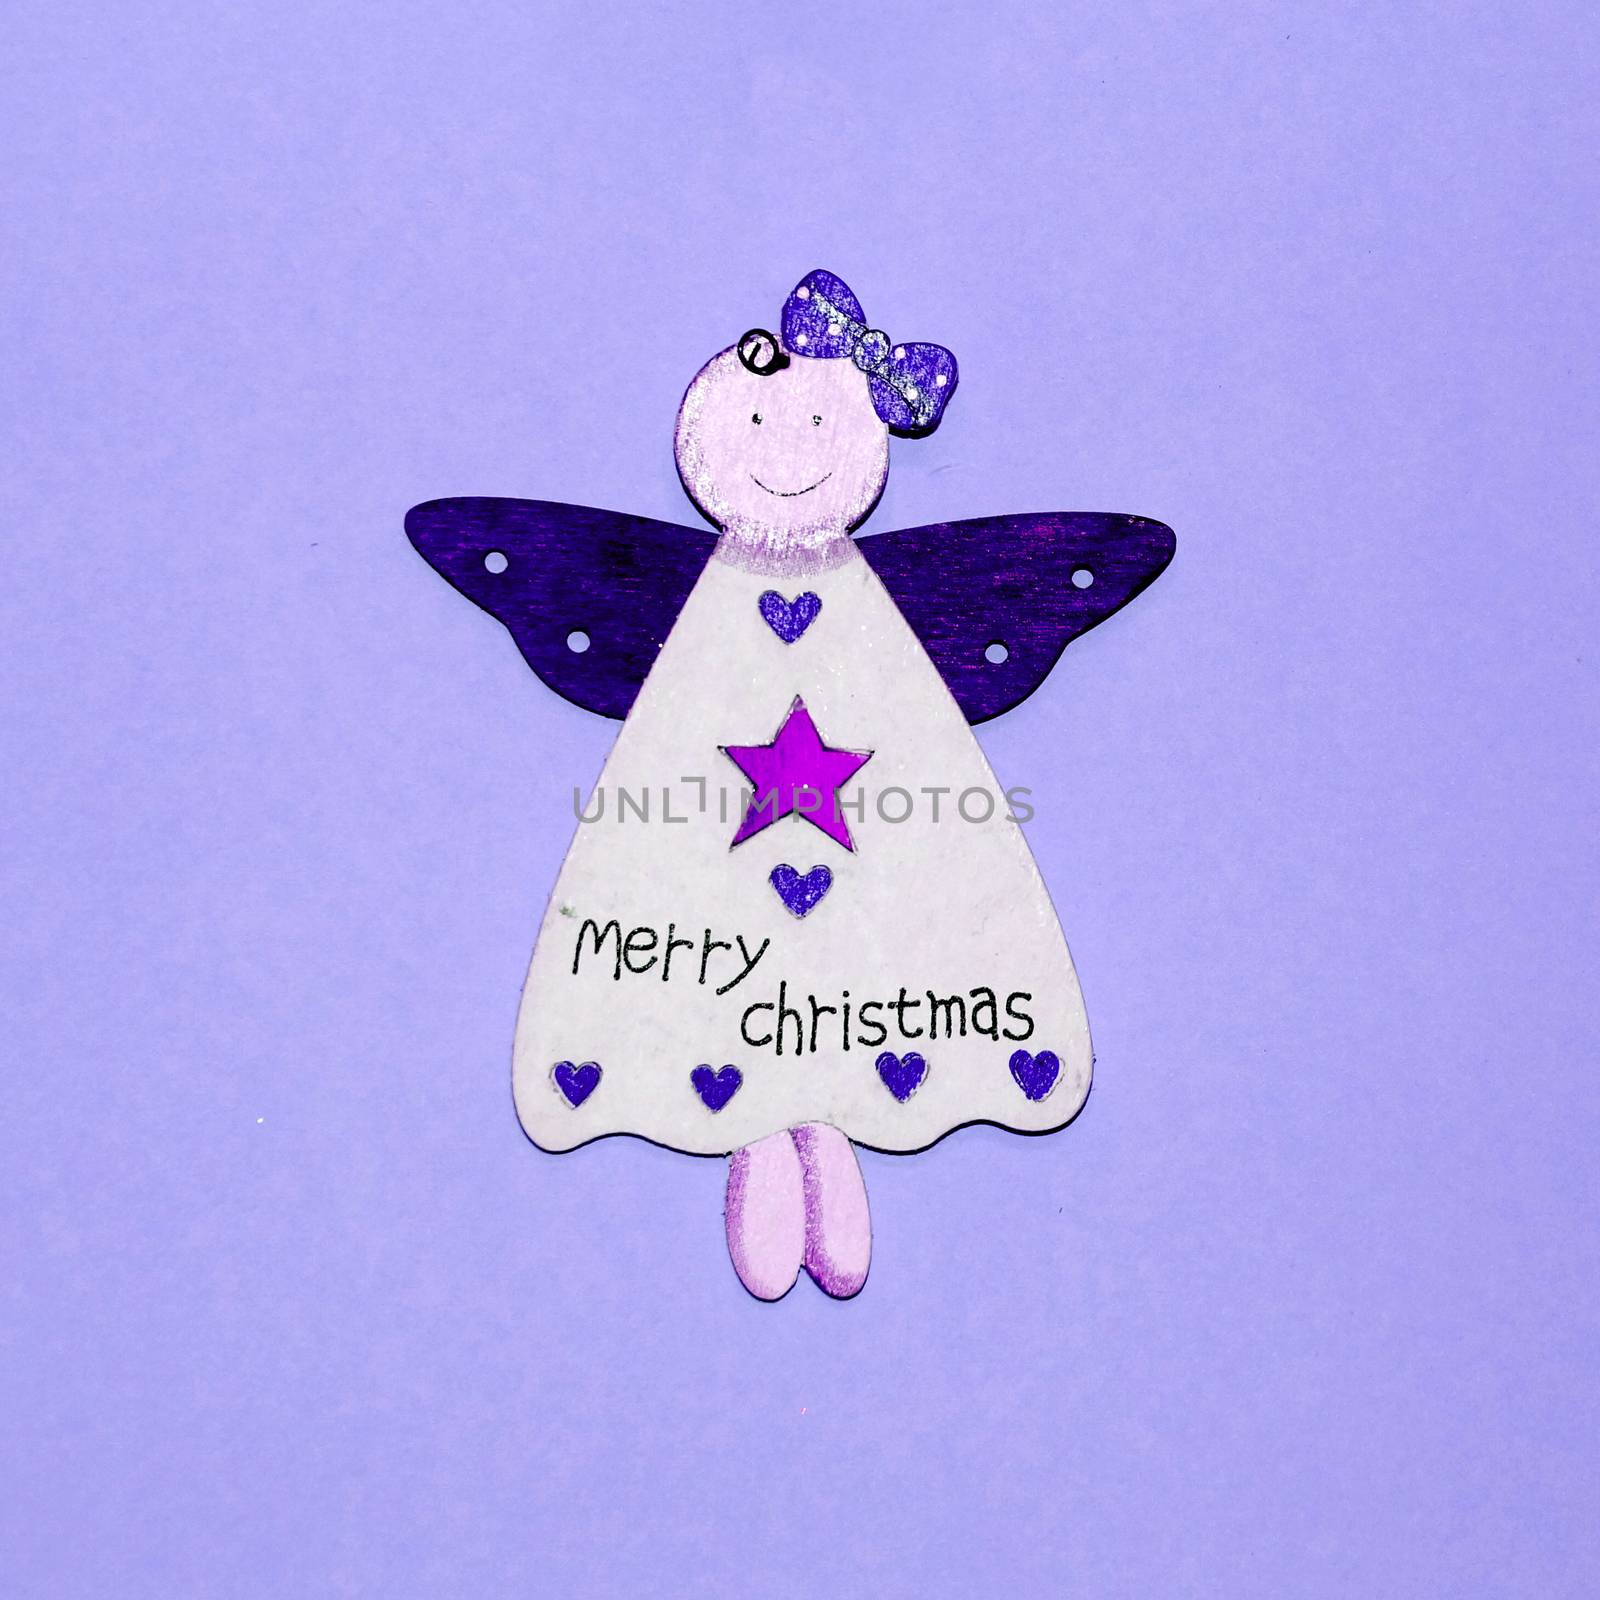 wooden angel with inscription on merry christmas dress on blue background by Annado